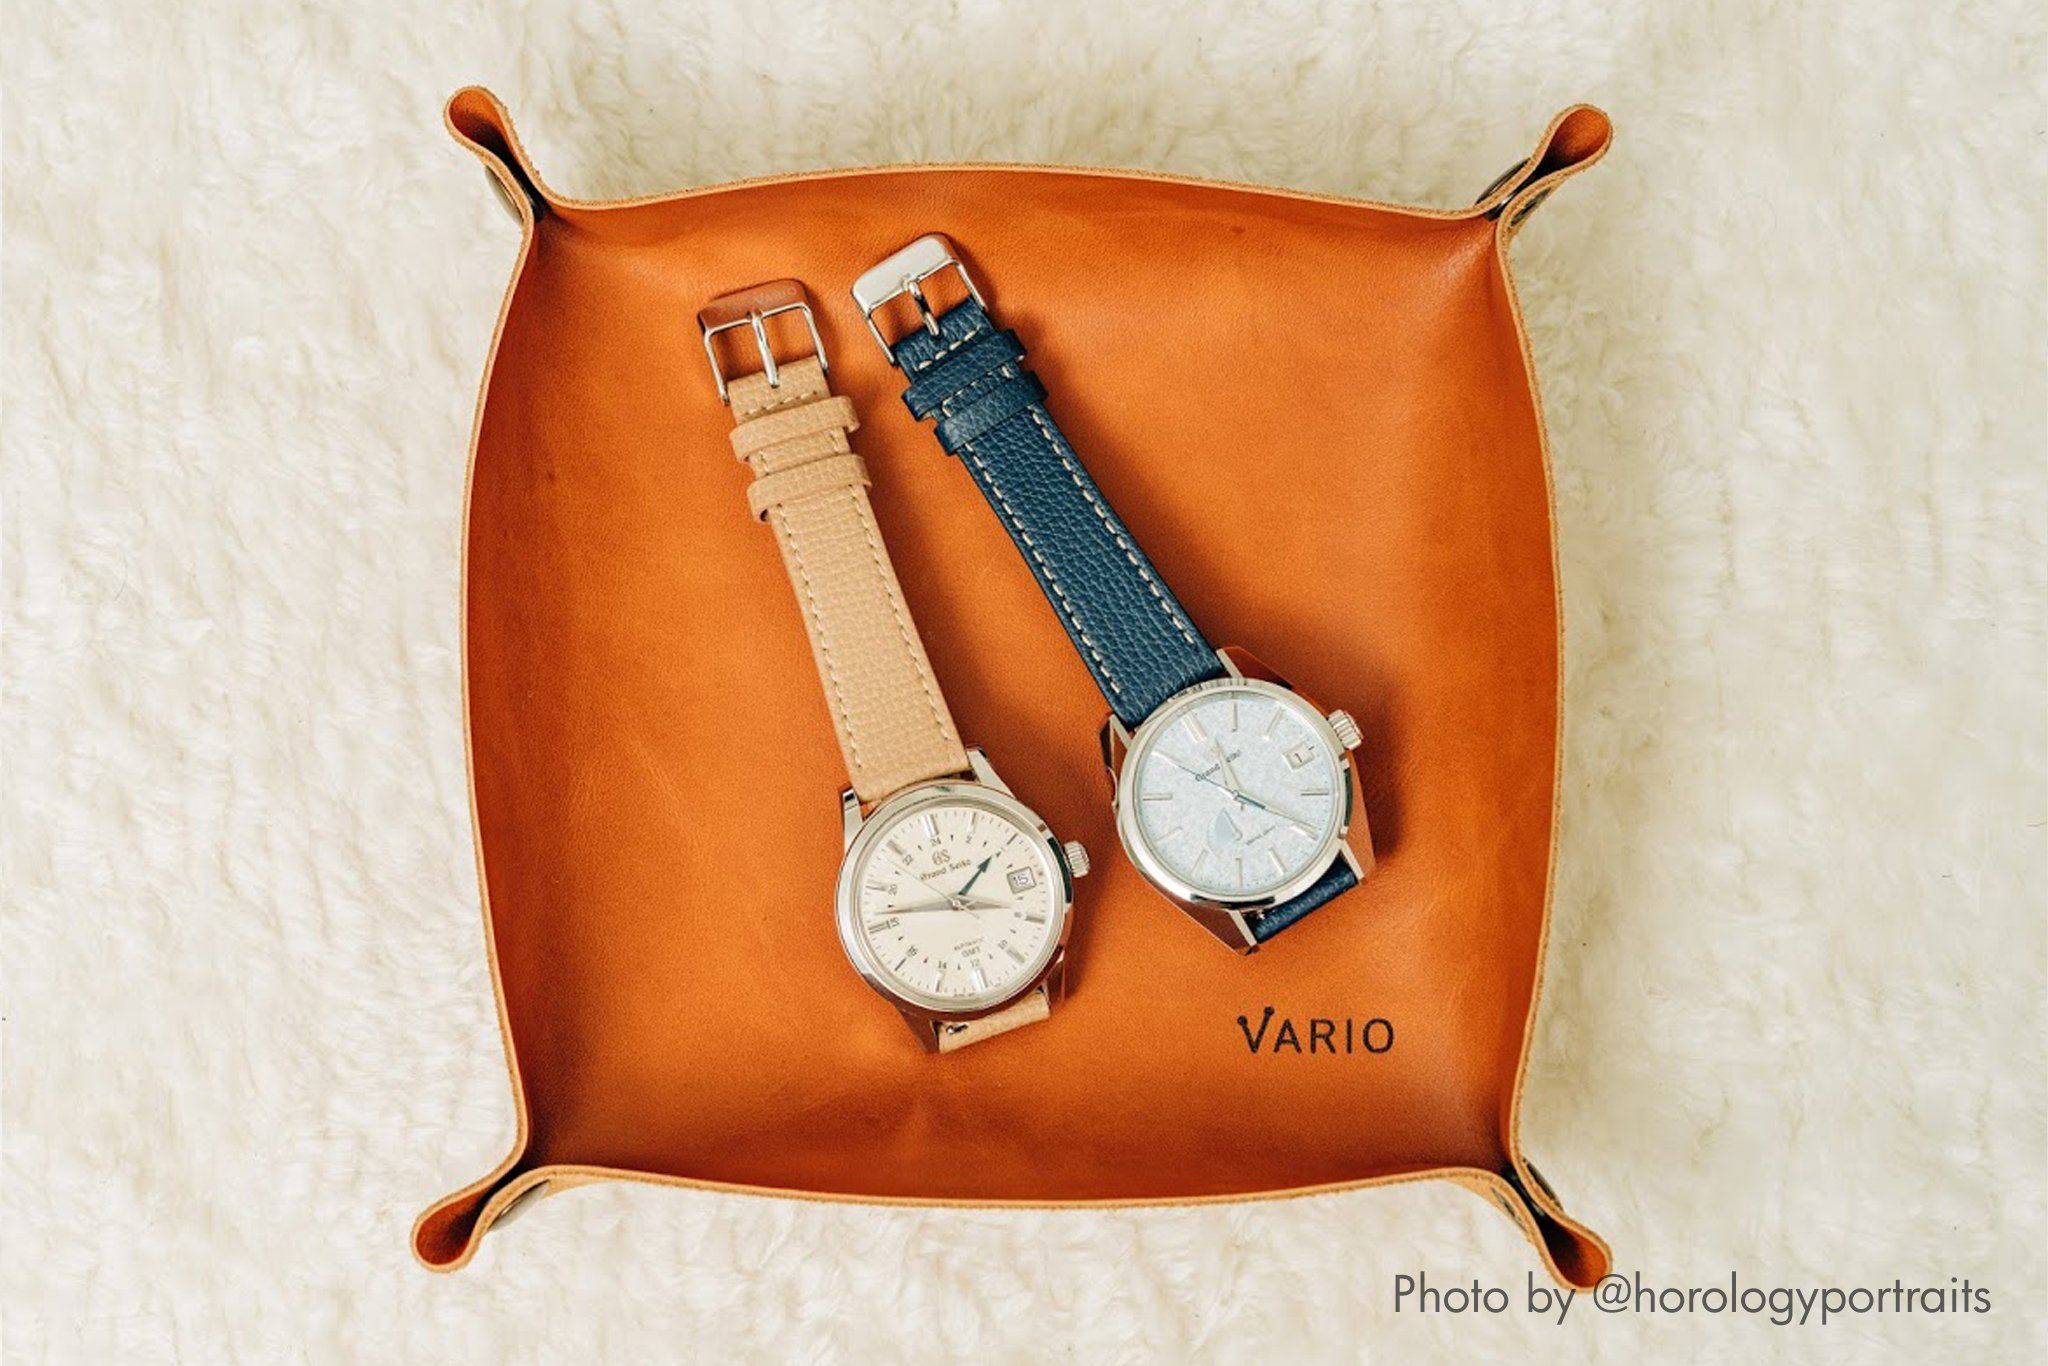 vario leather valet tray for watches and keys